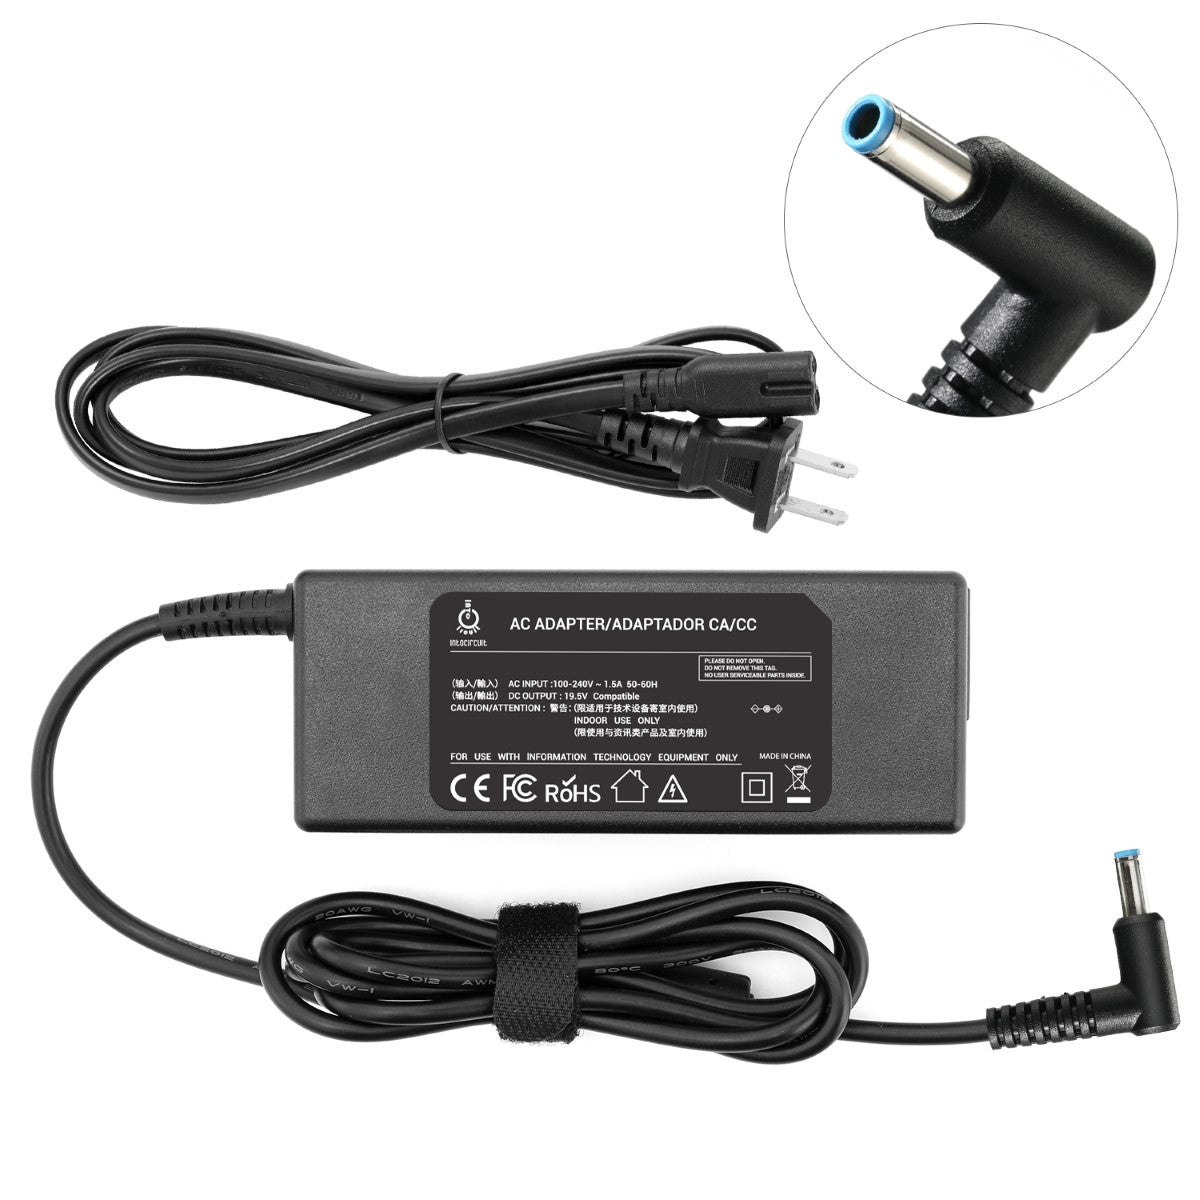 Charger for HP 15-g163nr Laptop